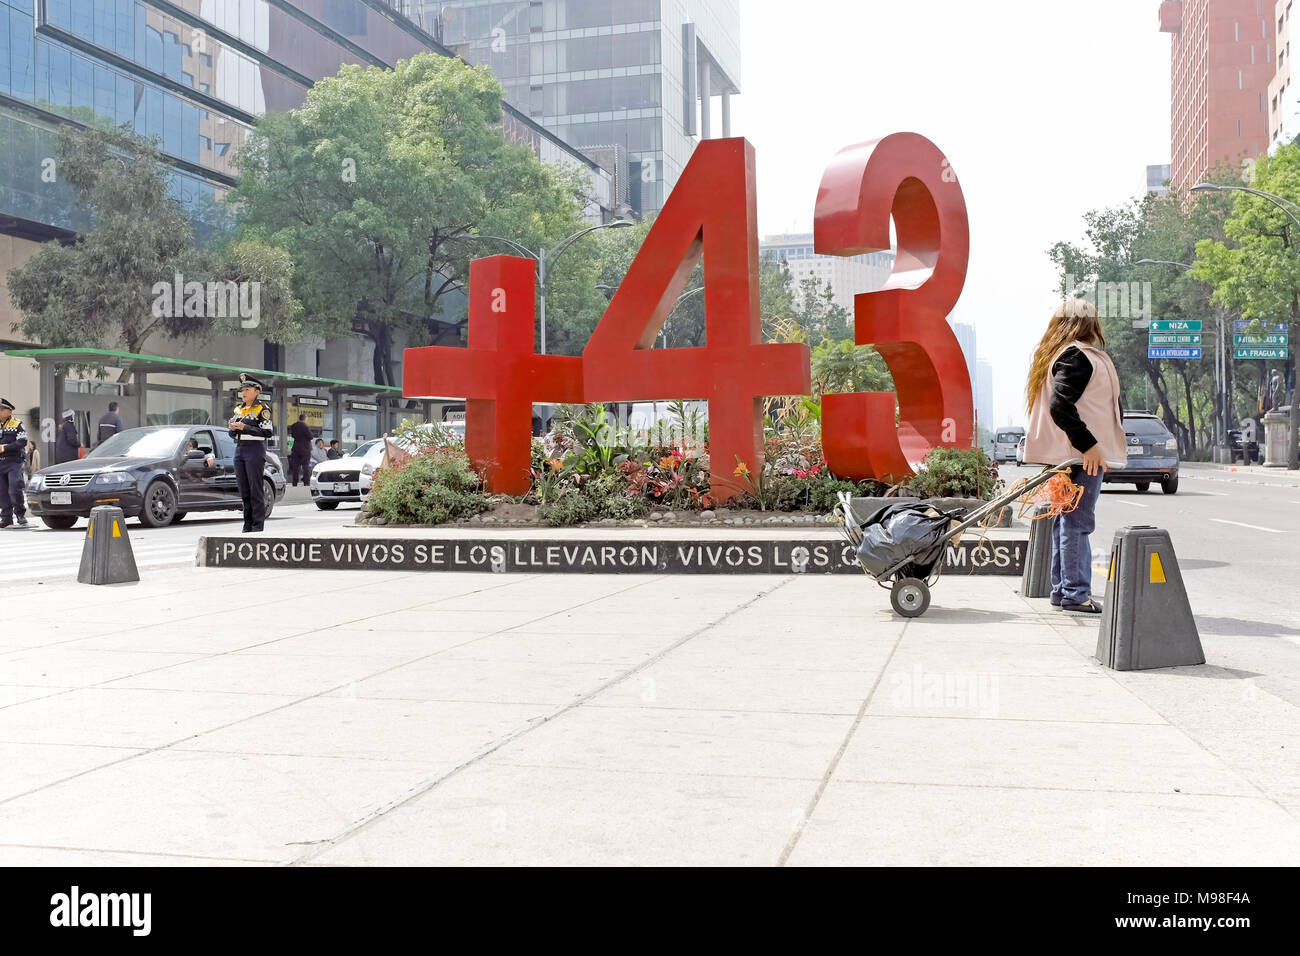 The large red 'Anti-Monumento 43' in Mexico City is a public reminder of the 43 students who disappeared at the hands of the authorities. Stock Photo